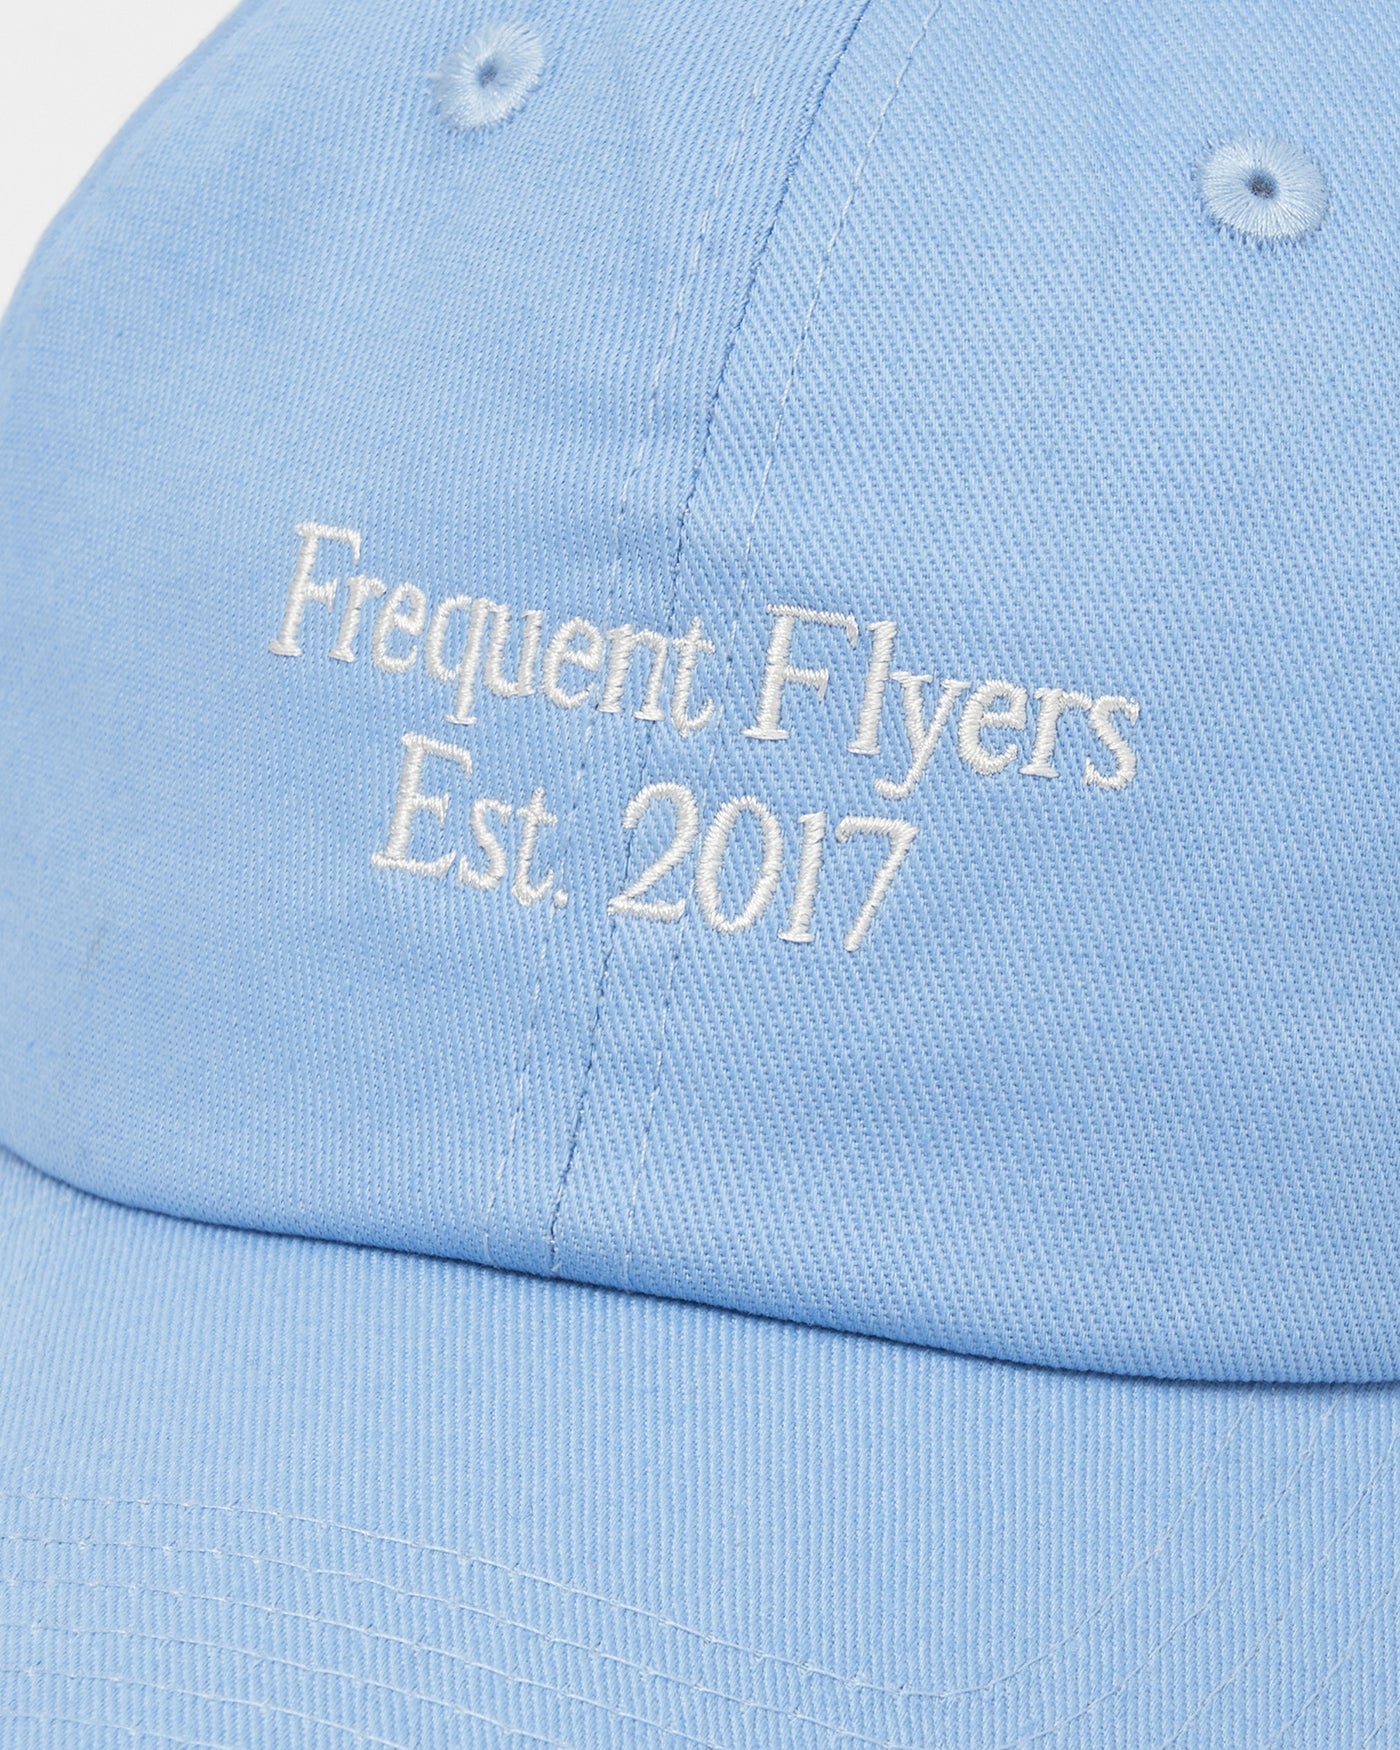 Frequent Flyer Hat